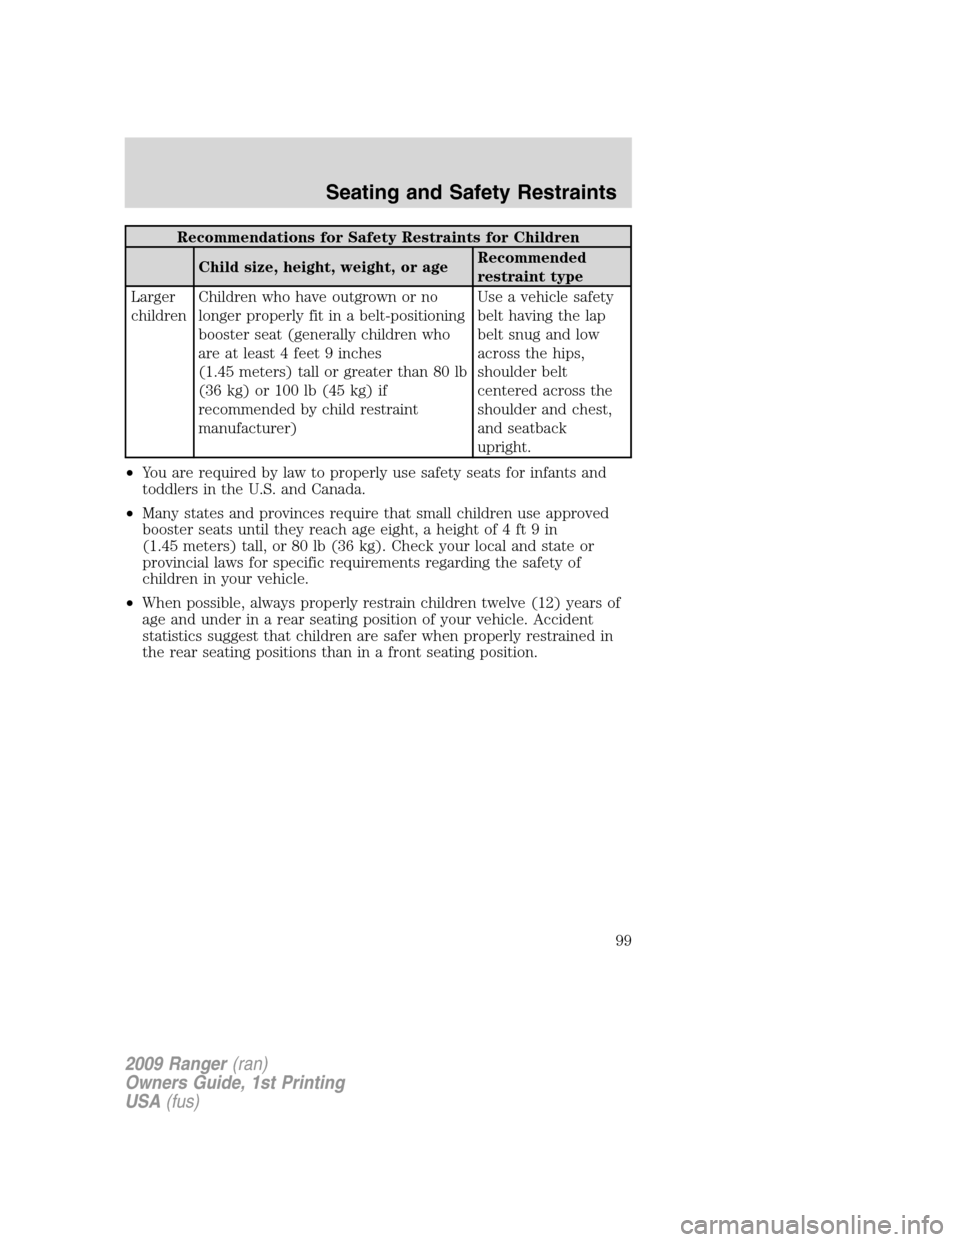 FORD RANGER 2009 2.G Owners Manual Recommendations for Safety Restraints for Children
Child size, height, weight, or ageRecommended
restraint type
Larger
childrenChildren who have outgrown or no
longer properly fit in a belt-positionin